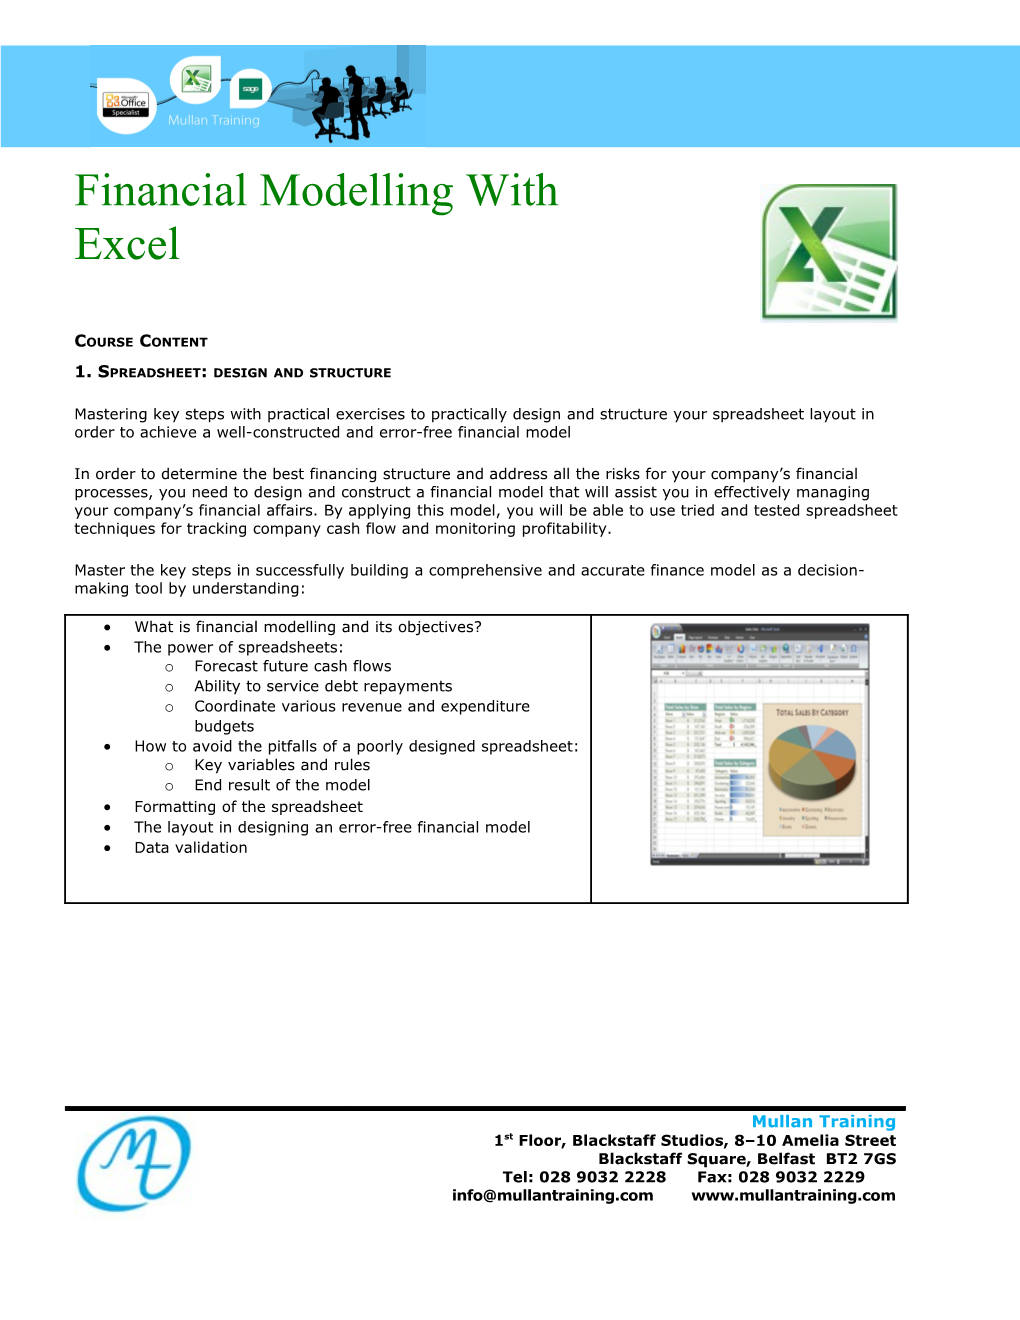 What Is Financial Modelling and Its Objectives?